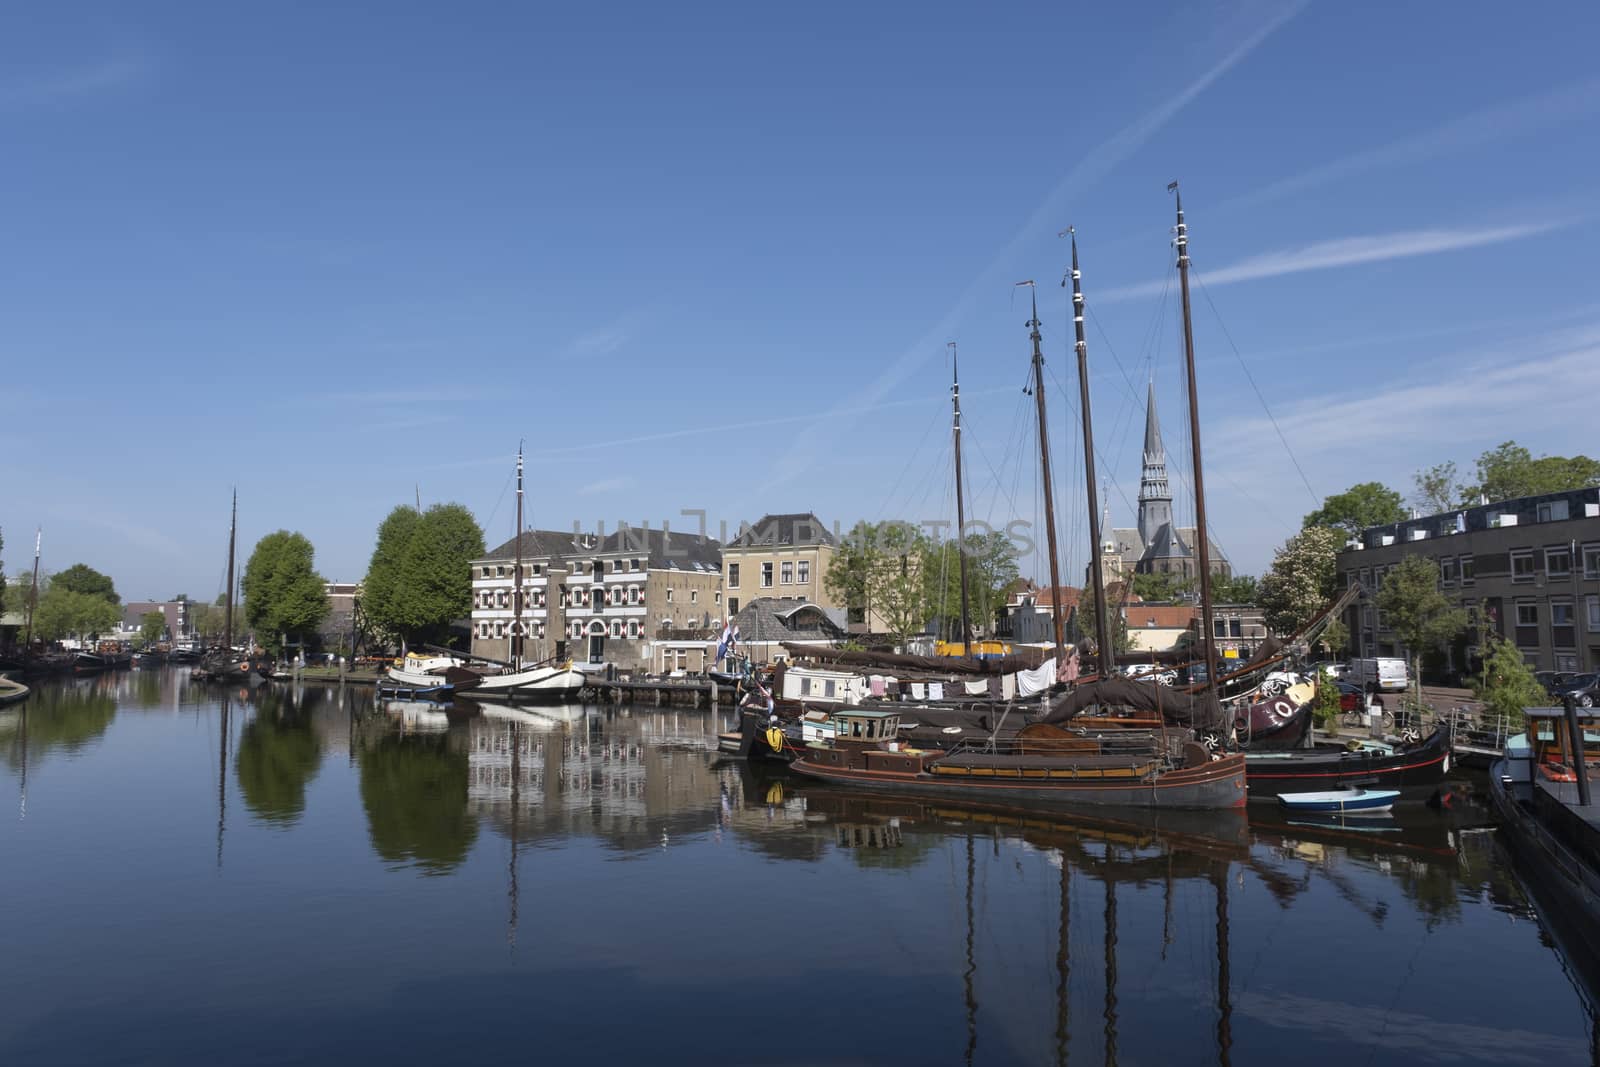 Museum harbor and Turfsingelgracht in Gouda with historic boats, by Tjeerdkruse